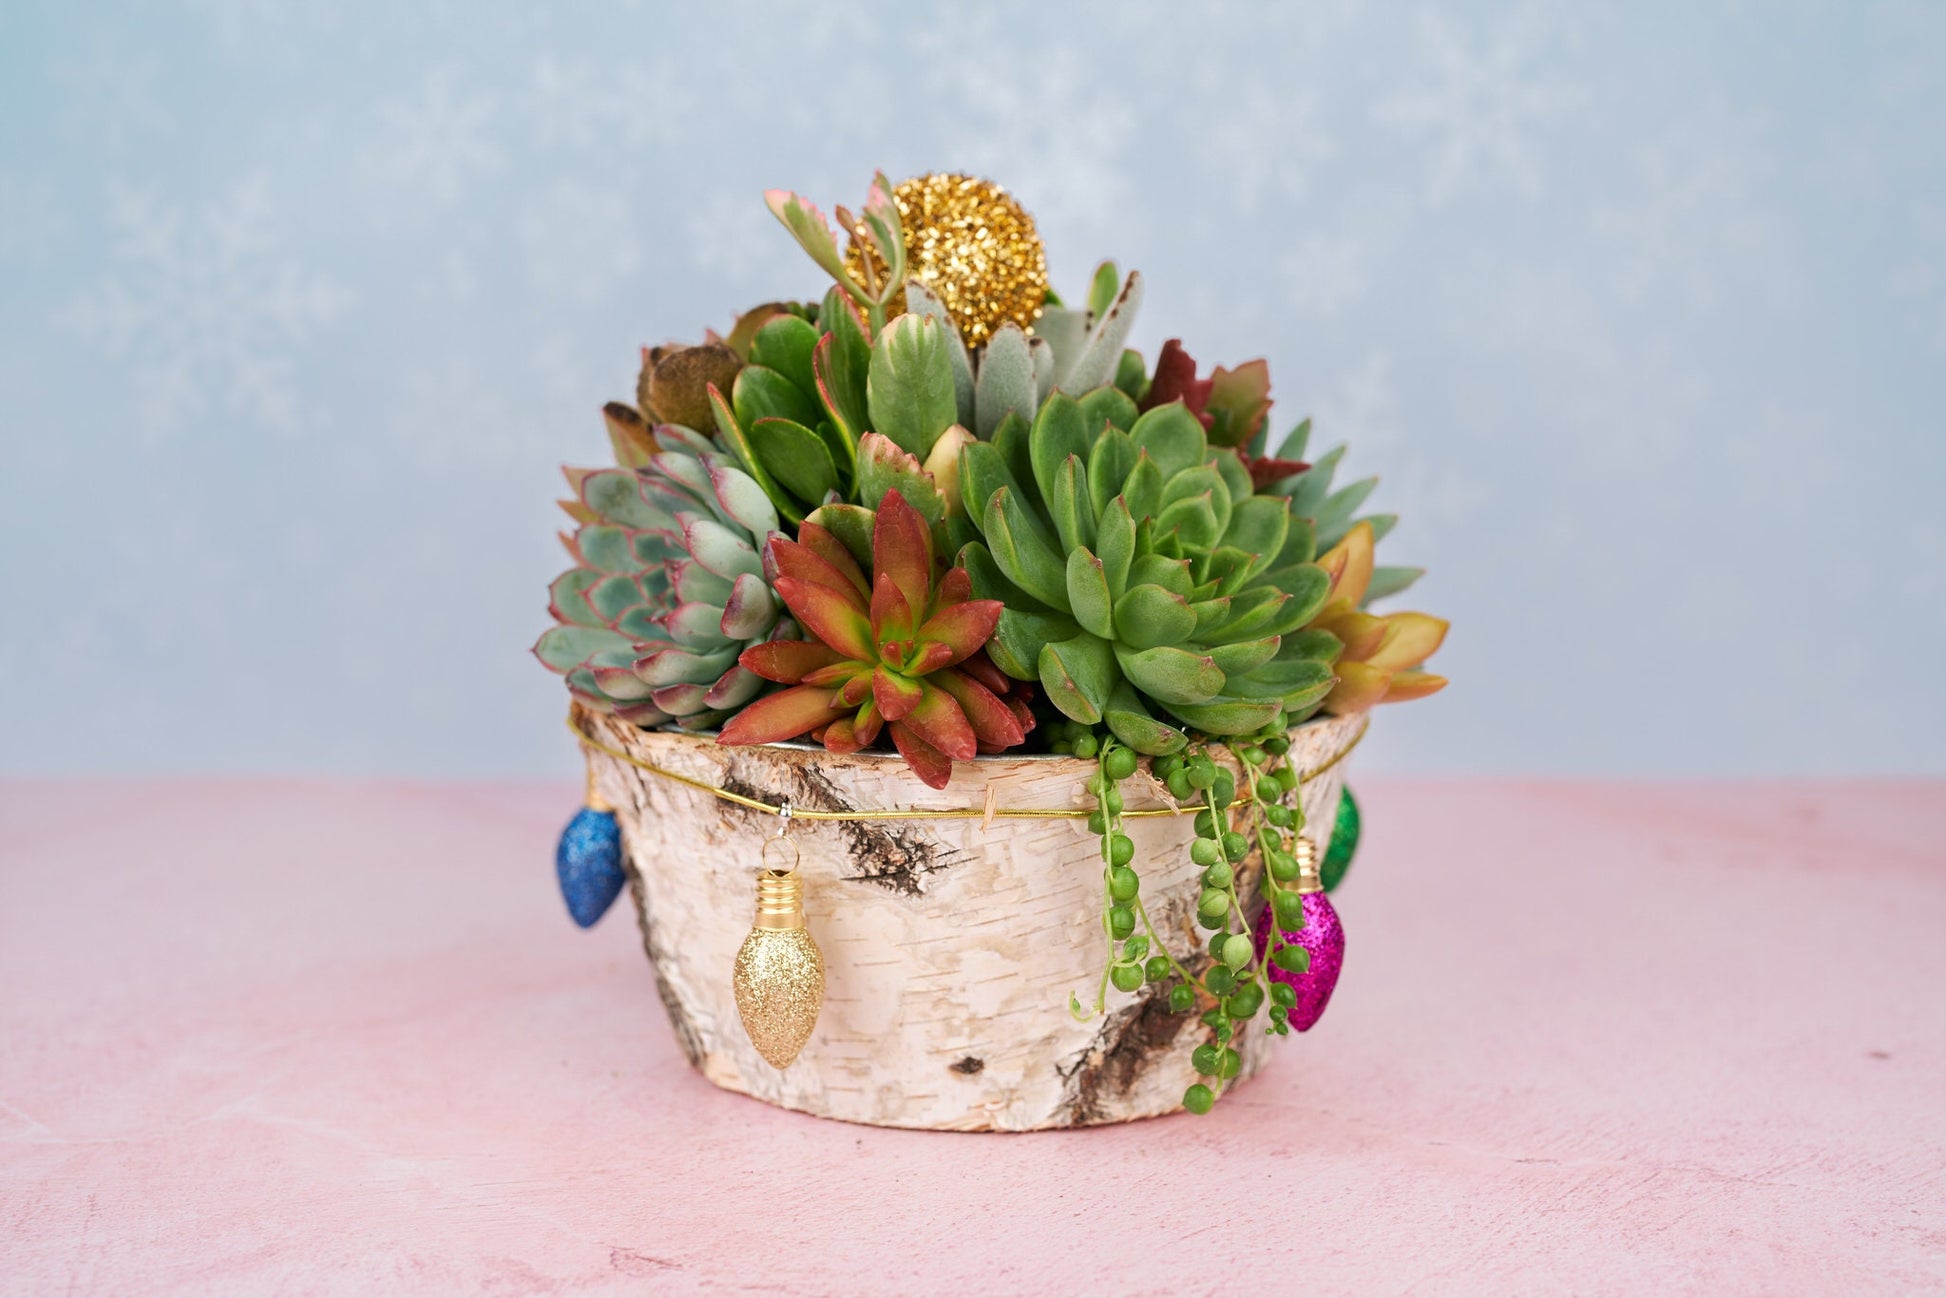 Christmas Holiday Round Birch Succulent Arrangement Planter: Living Succulent Centerpiece and Home Decor for Christmas and Winter Holidays